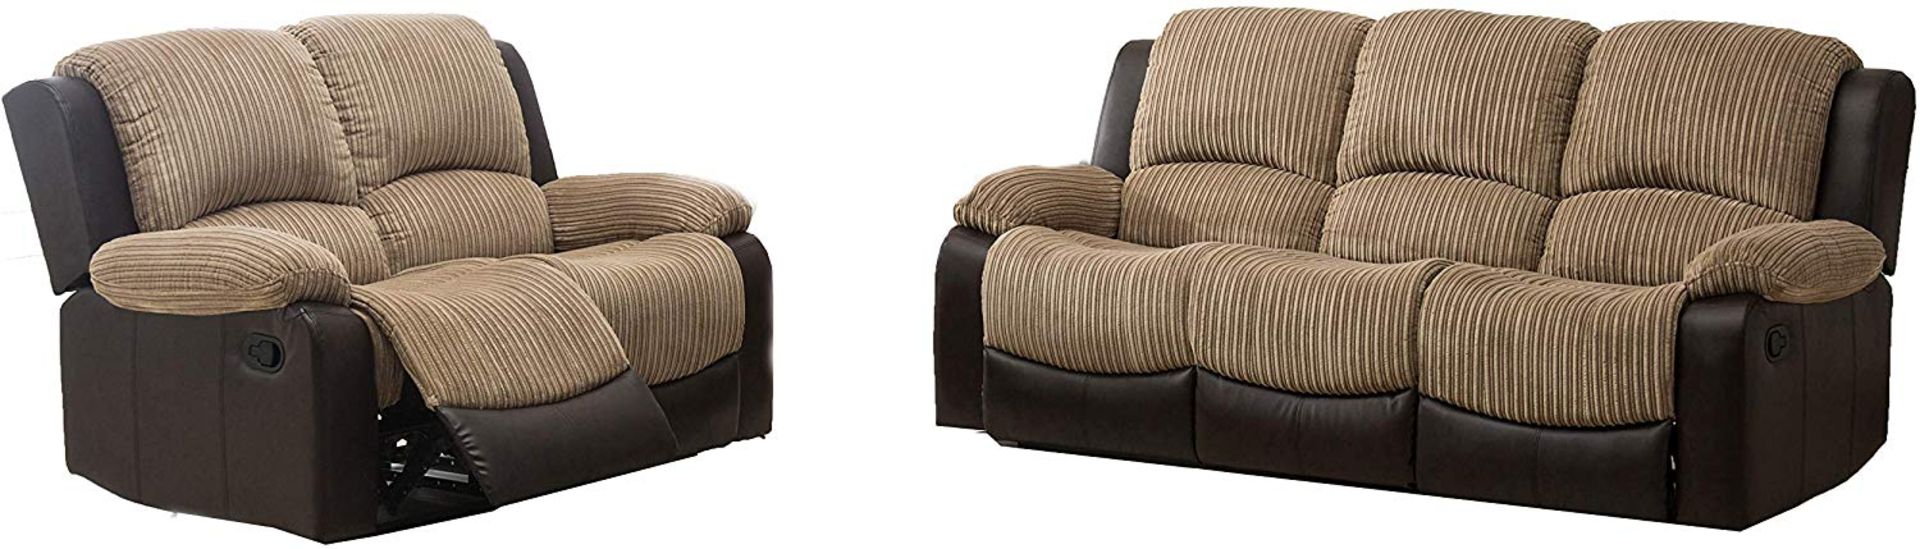 BRAND NEW BOXED CALIFORNIA 3 SEATER PLUS 2 SEATER RECLINING SOFAS IN BROWN/MOCCHA